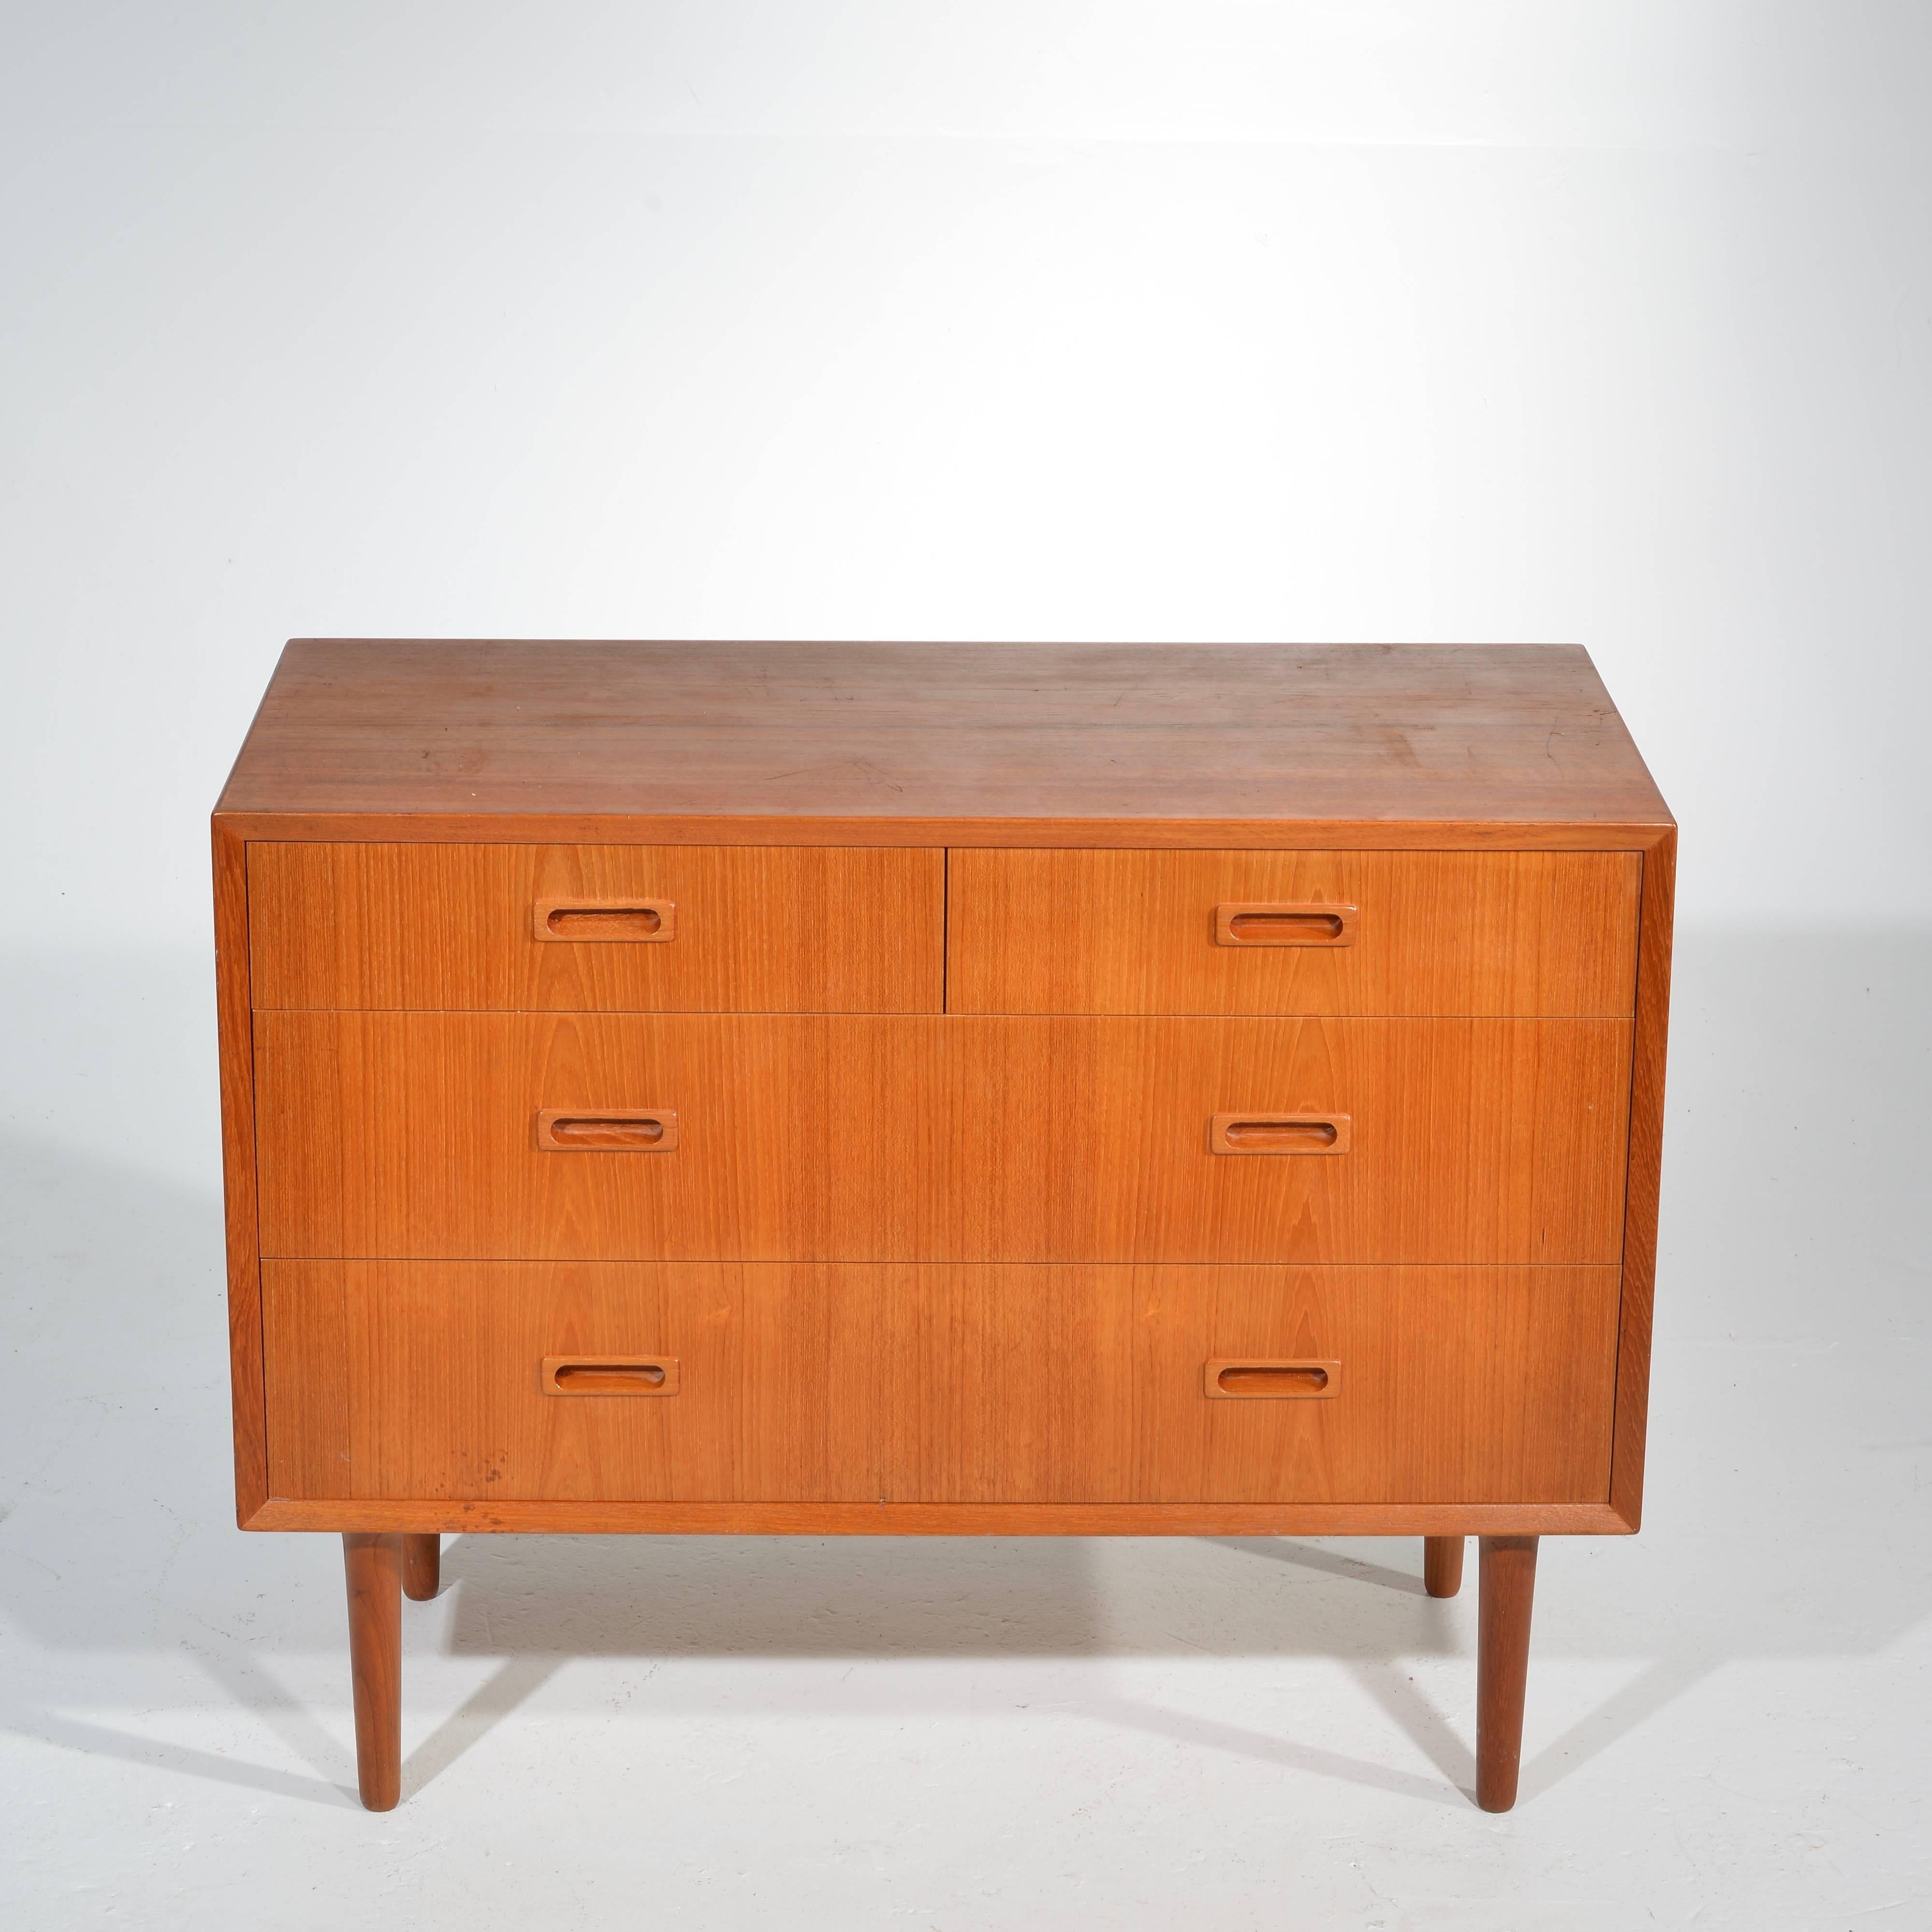 This Danish modern teak four-drawer cabinet is perfect to pair with our Pedersen & Hansen mirror to create a very stylish vanity.